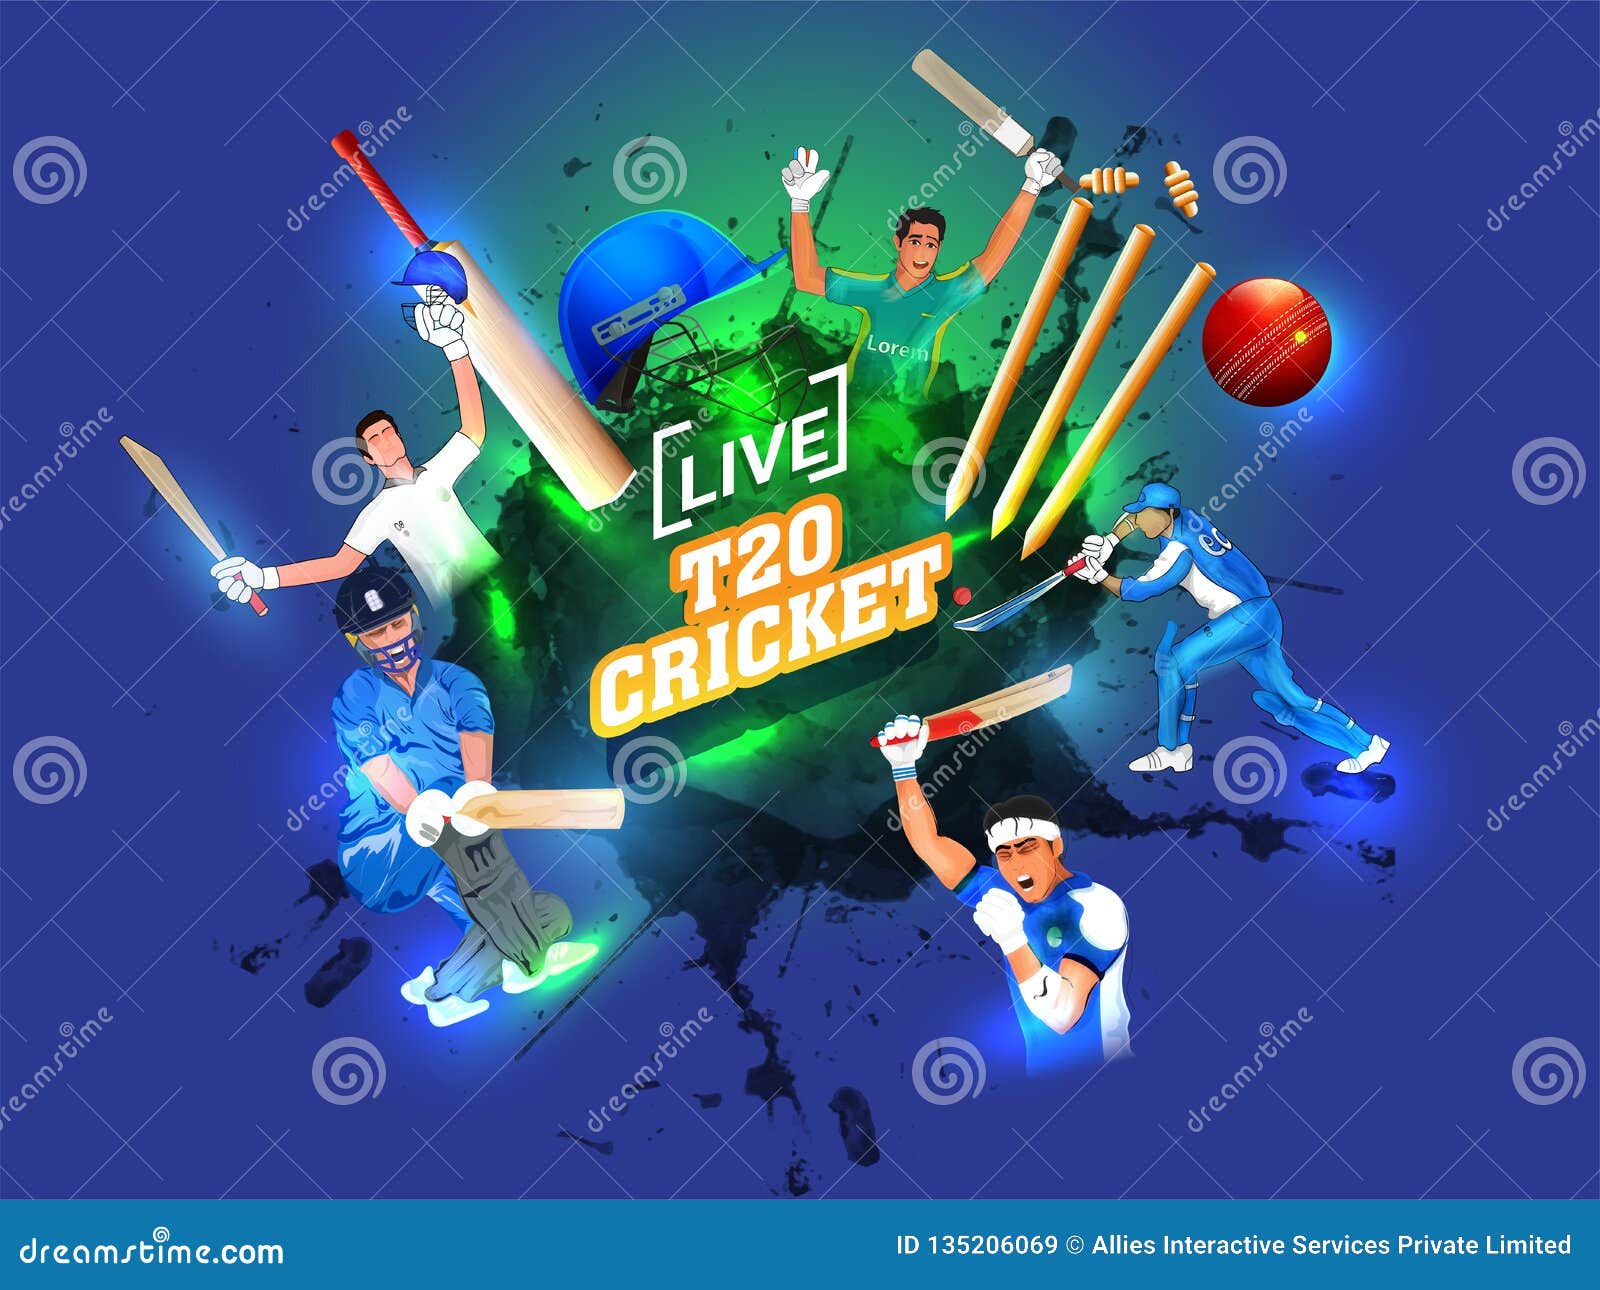 Creative Poster or Banner Design with Cricket Player in Different Playing  Action on Abstract Blue Background for Live T20 Cricket Stock Illustration  - Illustration of cricketer, championship: 135206069